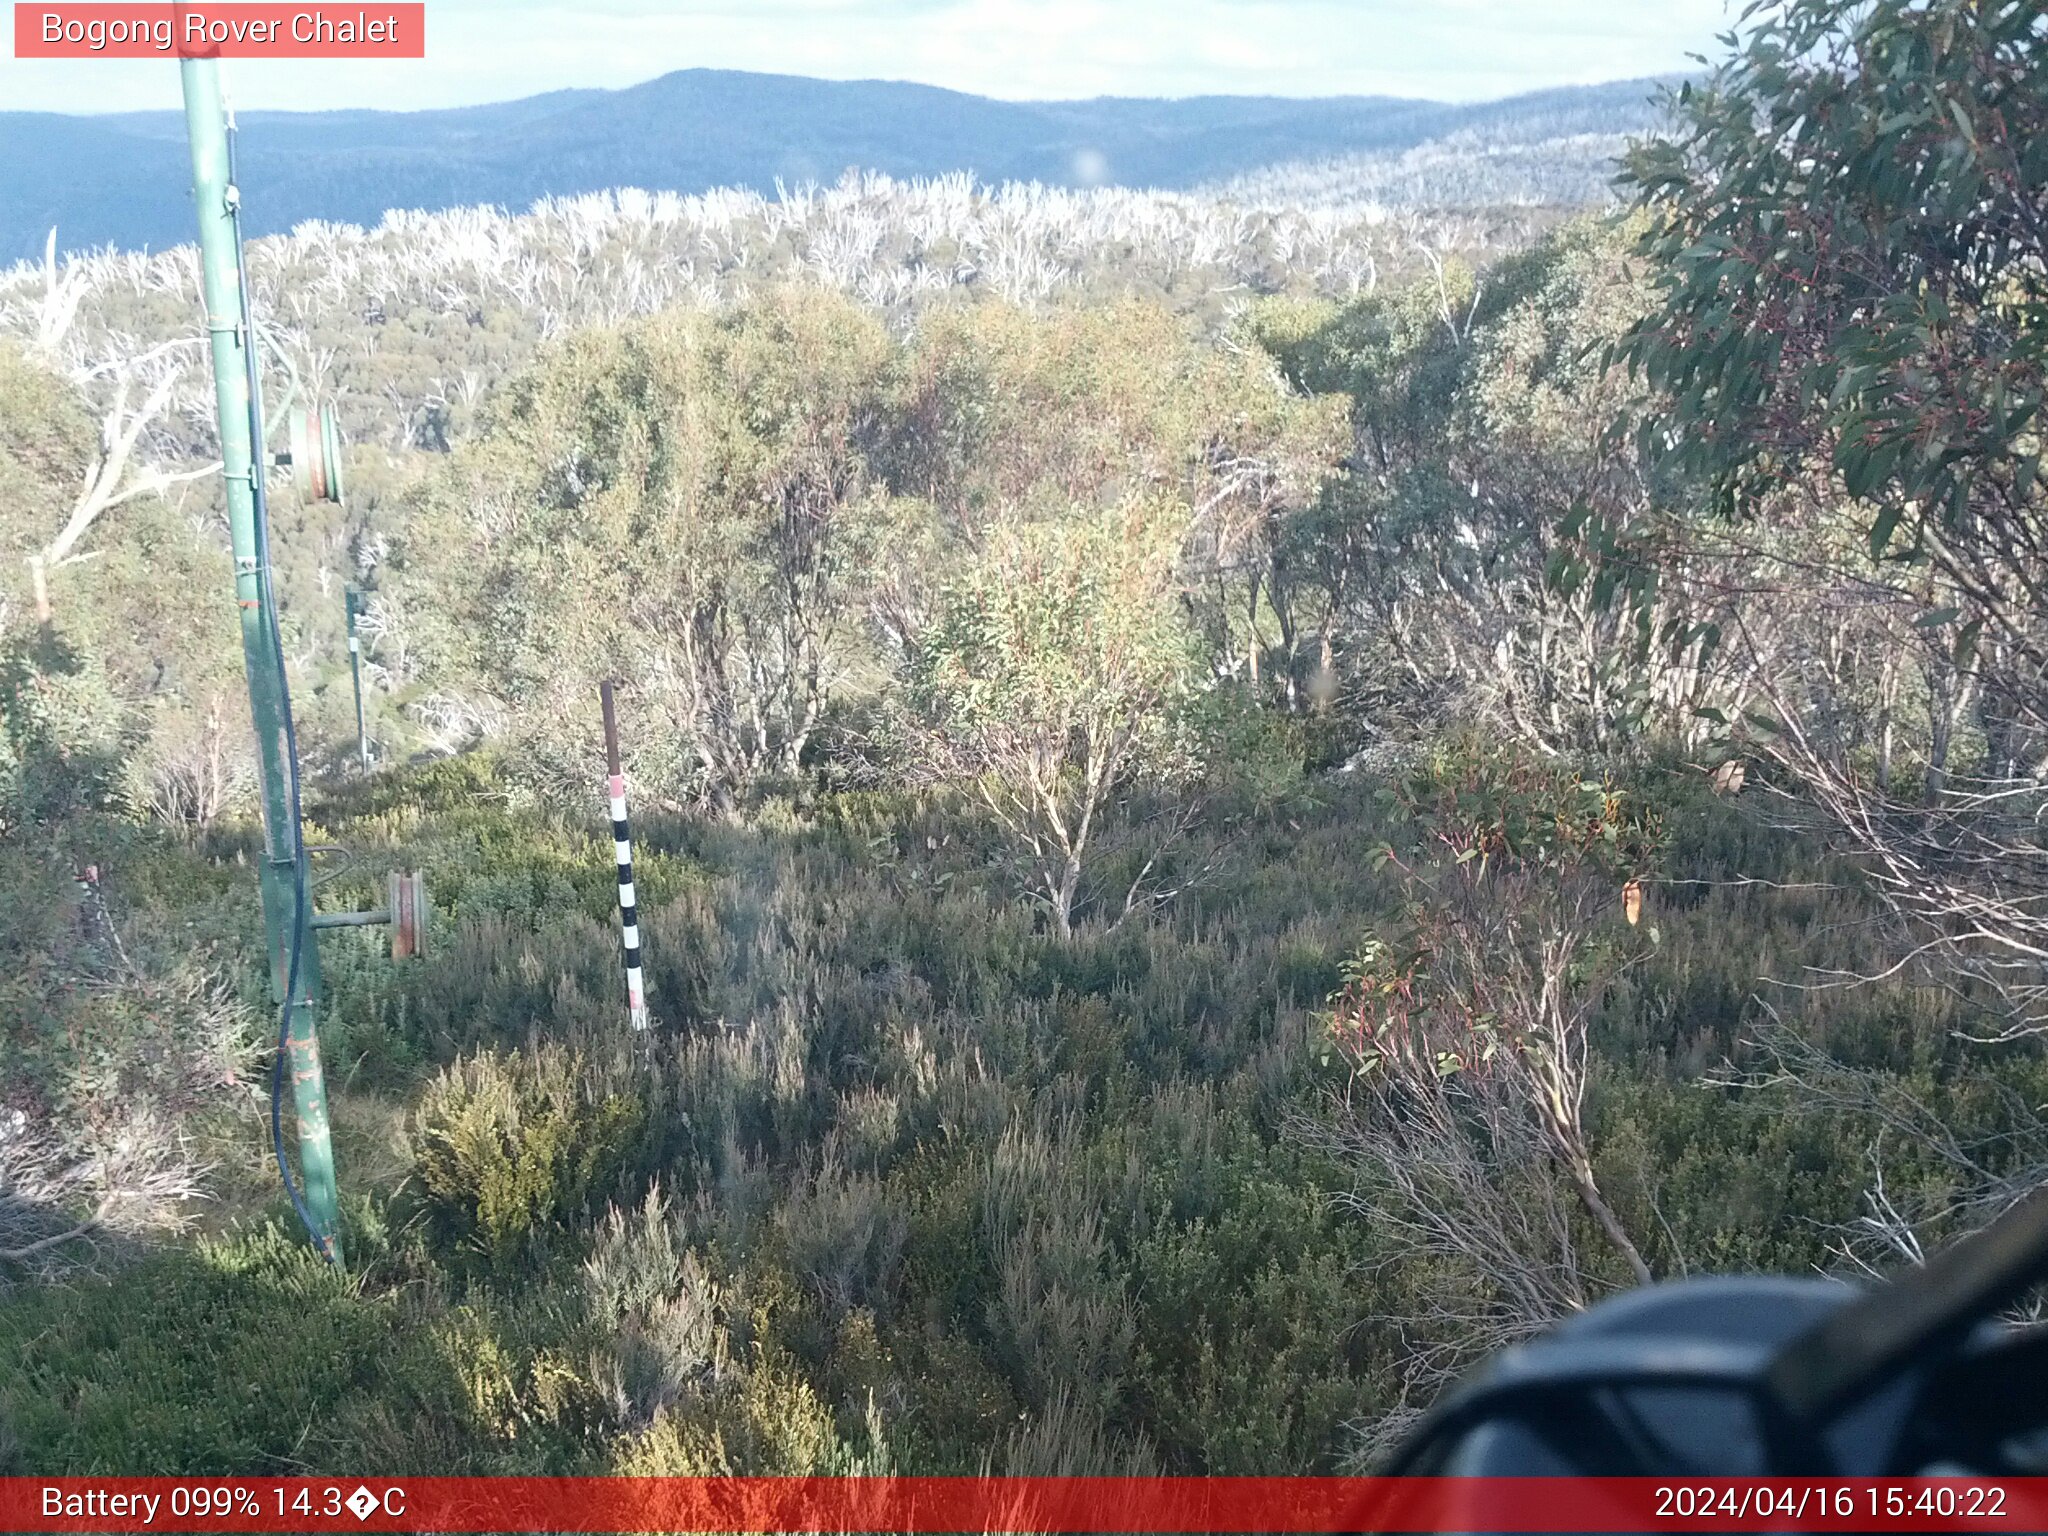 Bogong Web Cam 3:40pm Tuesday 16th of April 2024